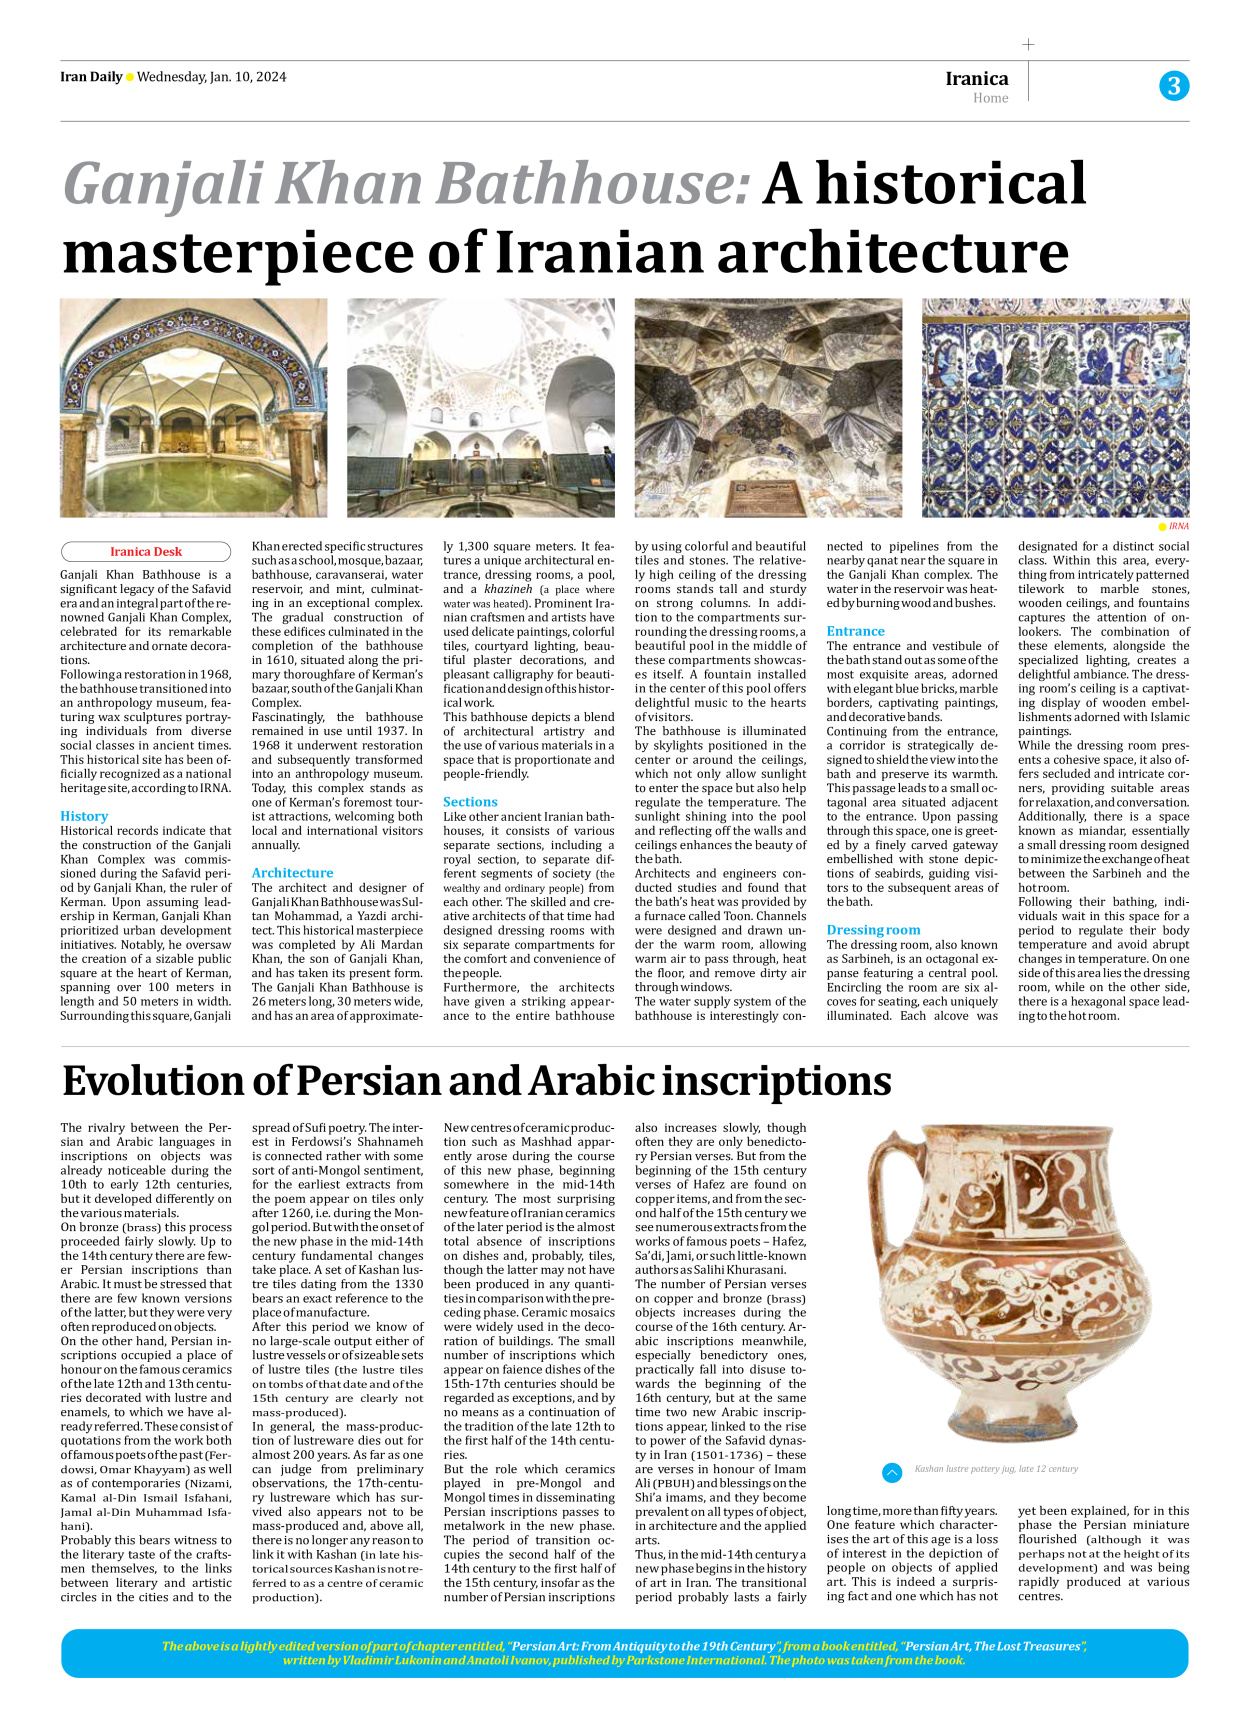 Iran Daily - Number Seven Thousand Four Hundred and Eighty One - 10 January 2024 - Page 3